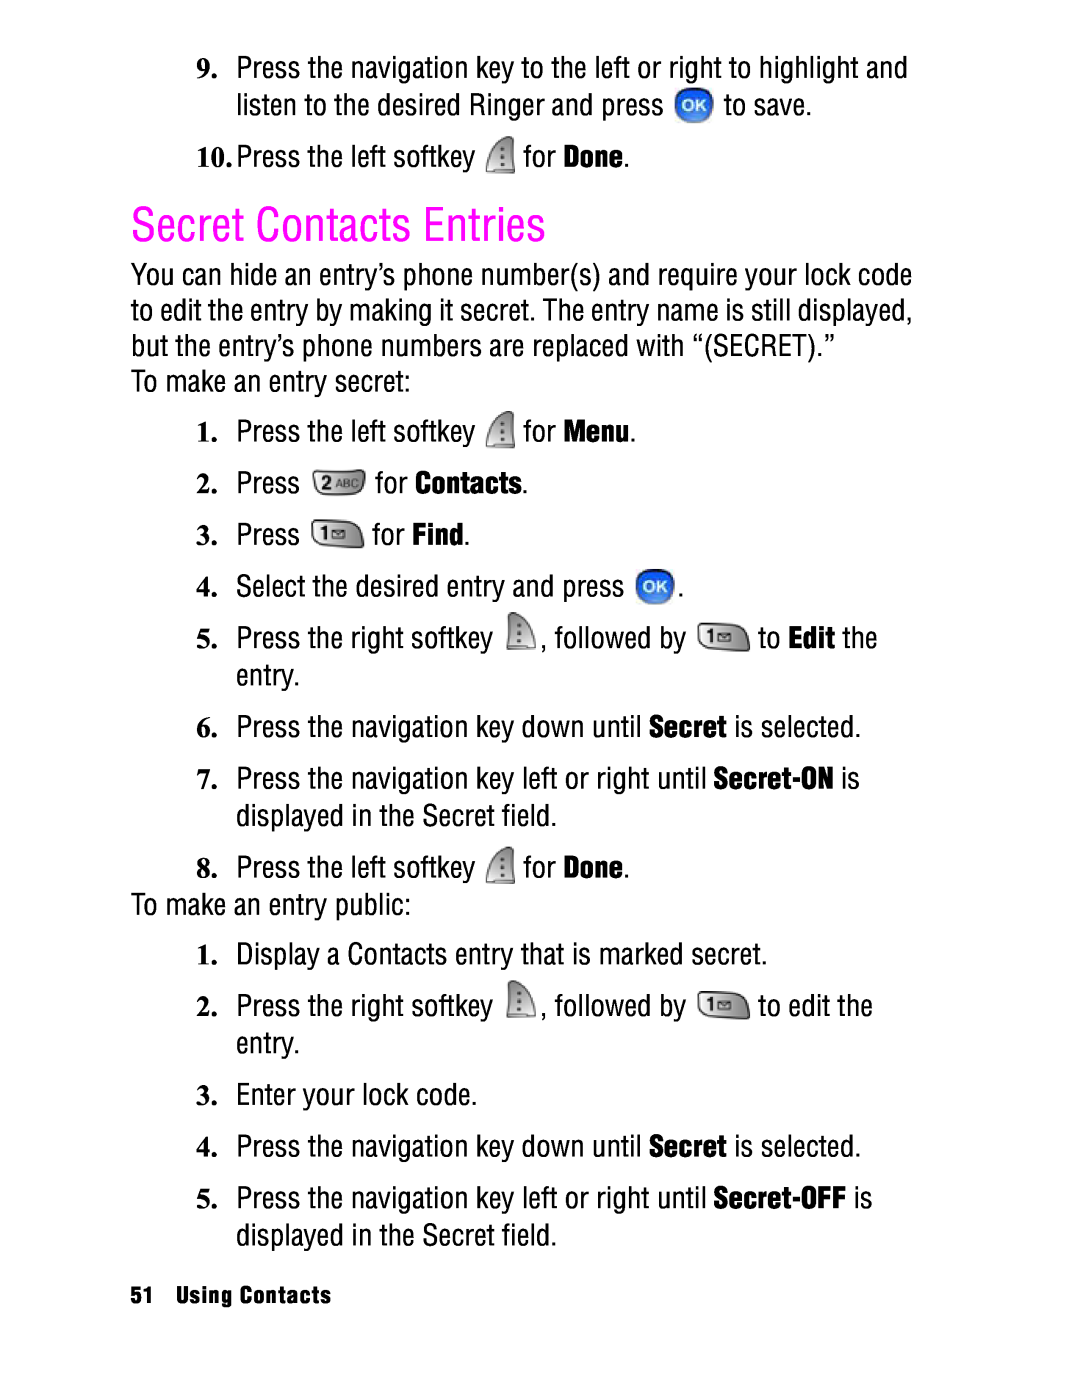 Samsung SPH-a740 manual Secret Contacts Entries, Using Contacts 